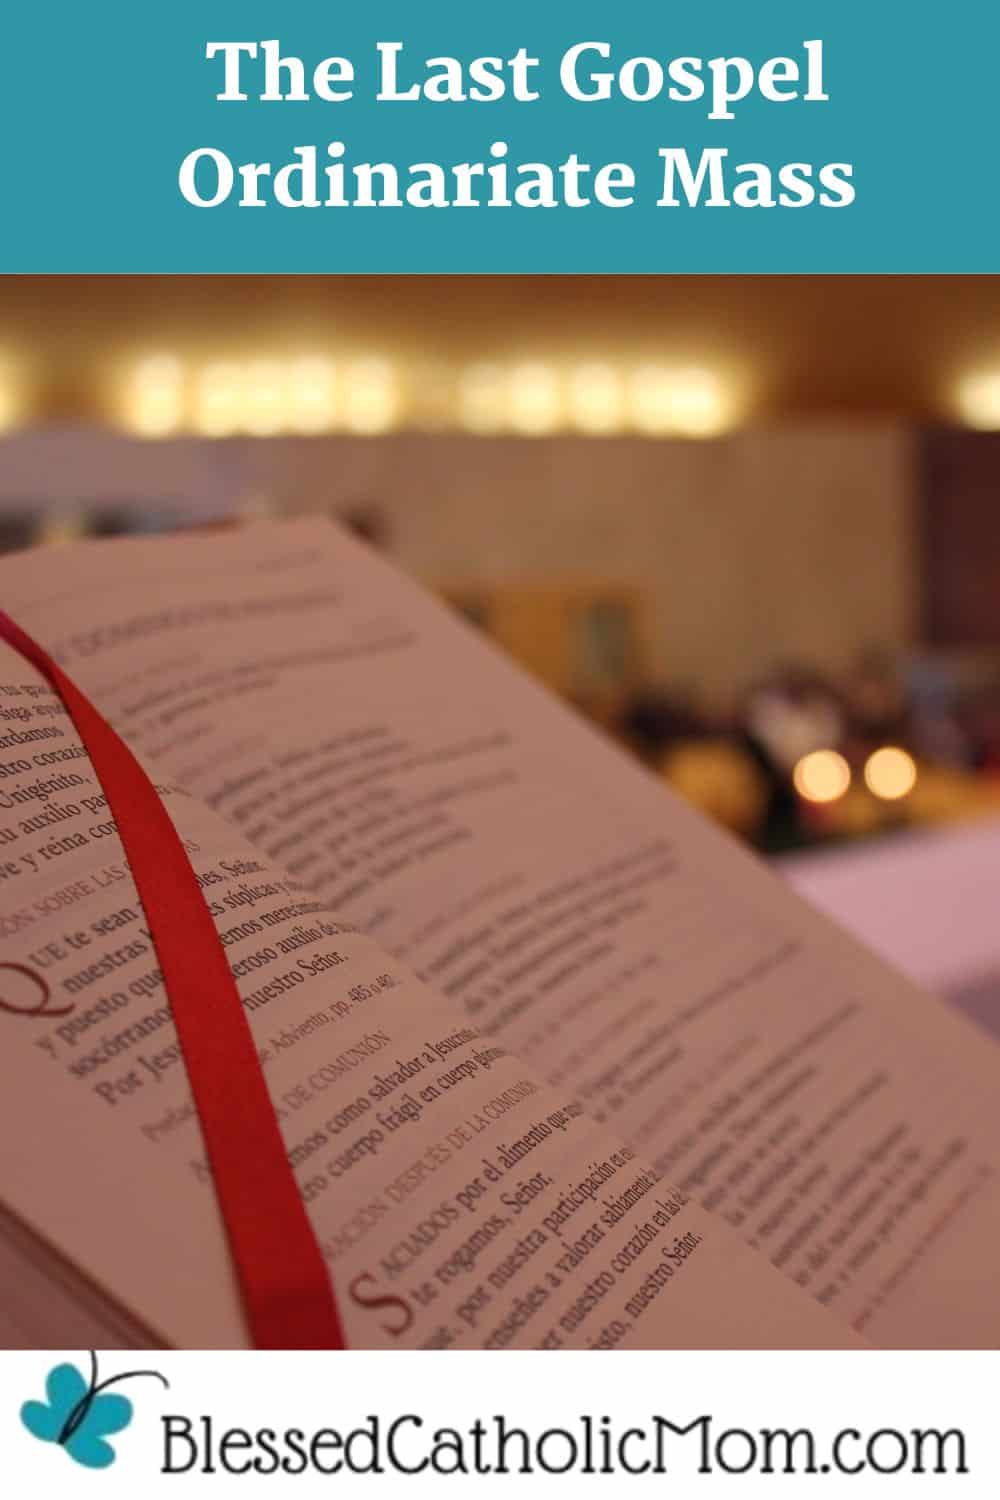 Image of a Bible open on a stand at Mass with a red ribbon on it. Words above the image read: The Last Gospel Ordinariate Mass. The logo below is for Blessed Catholic Mom dot com.